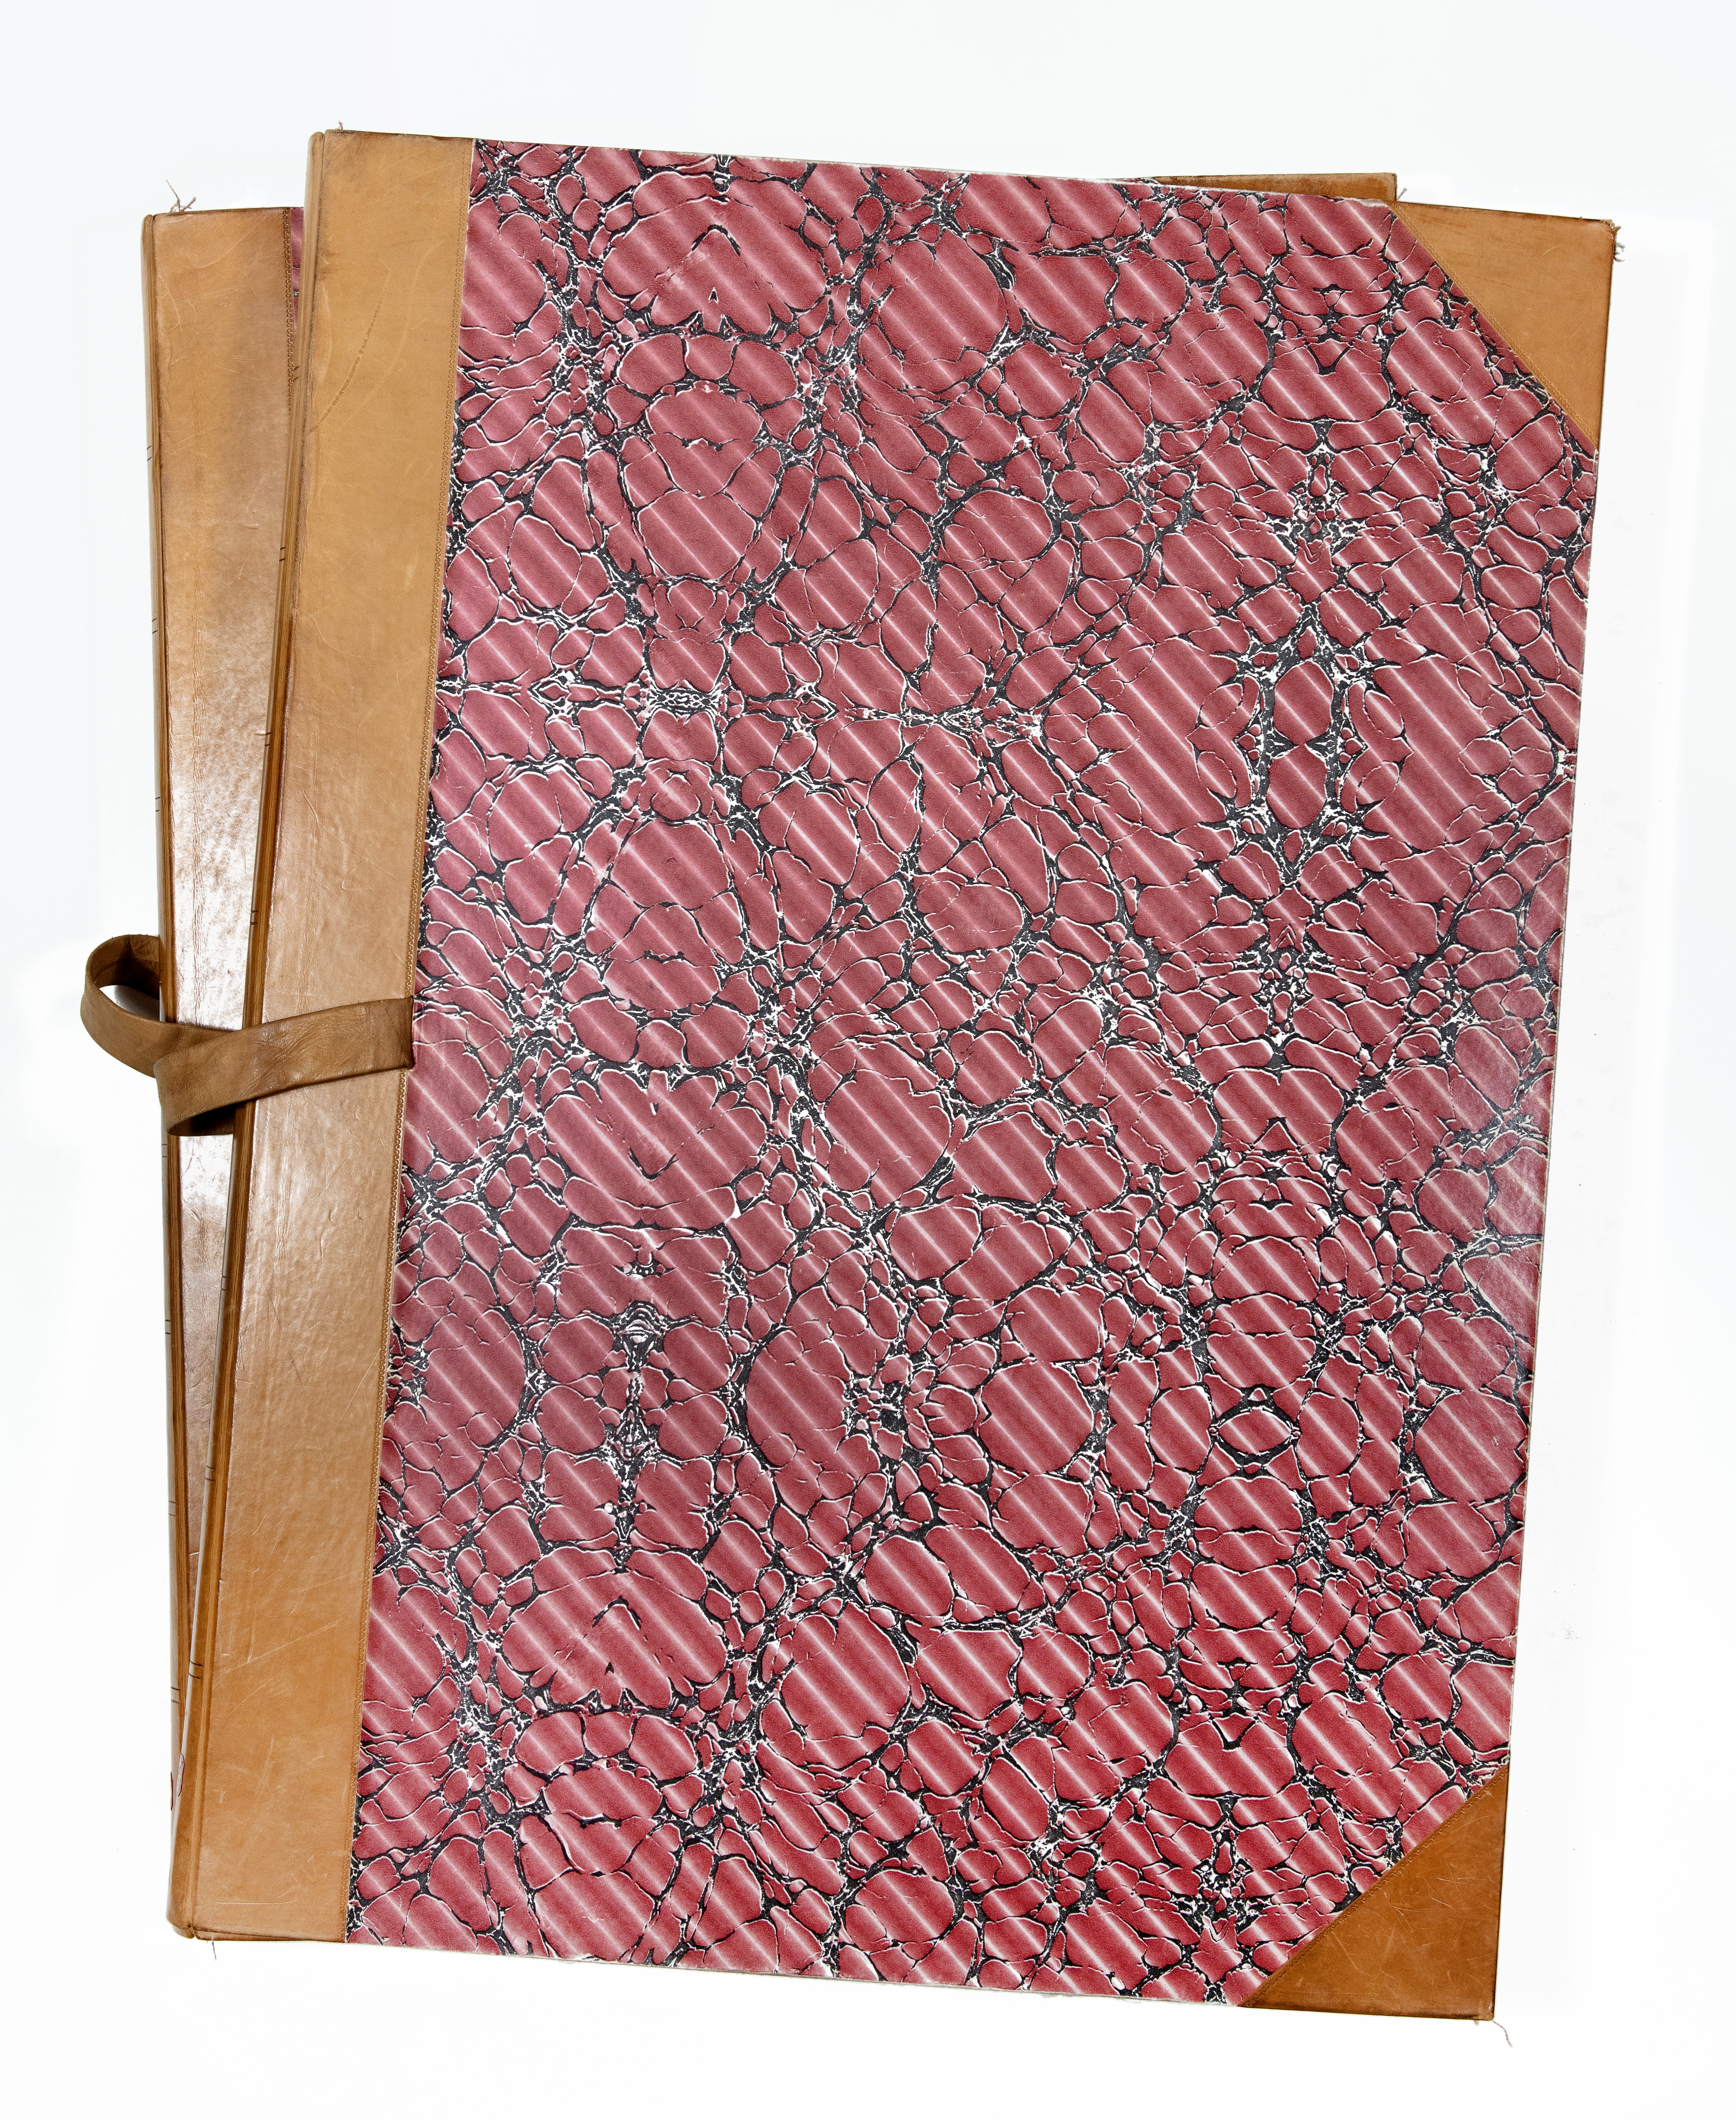 Two stacked albums covered with red patterned stone marble paper and brown leather at the corners and the spine